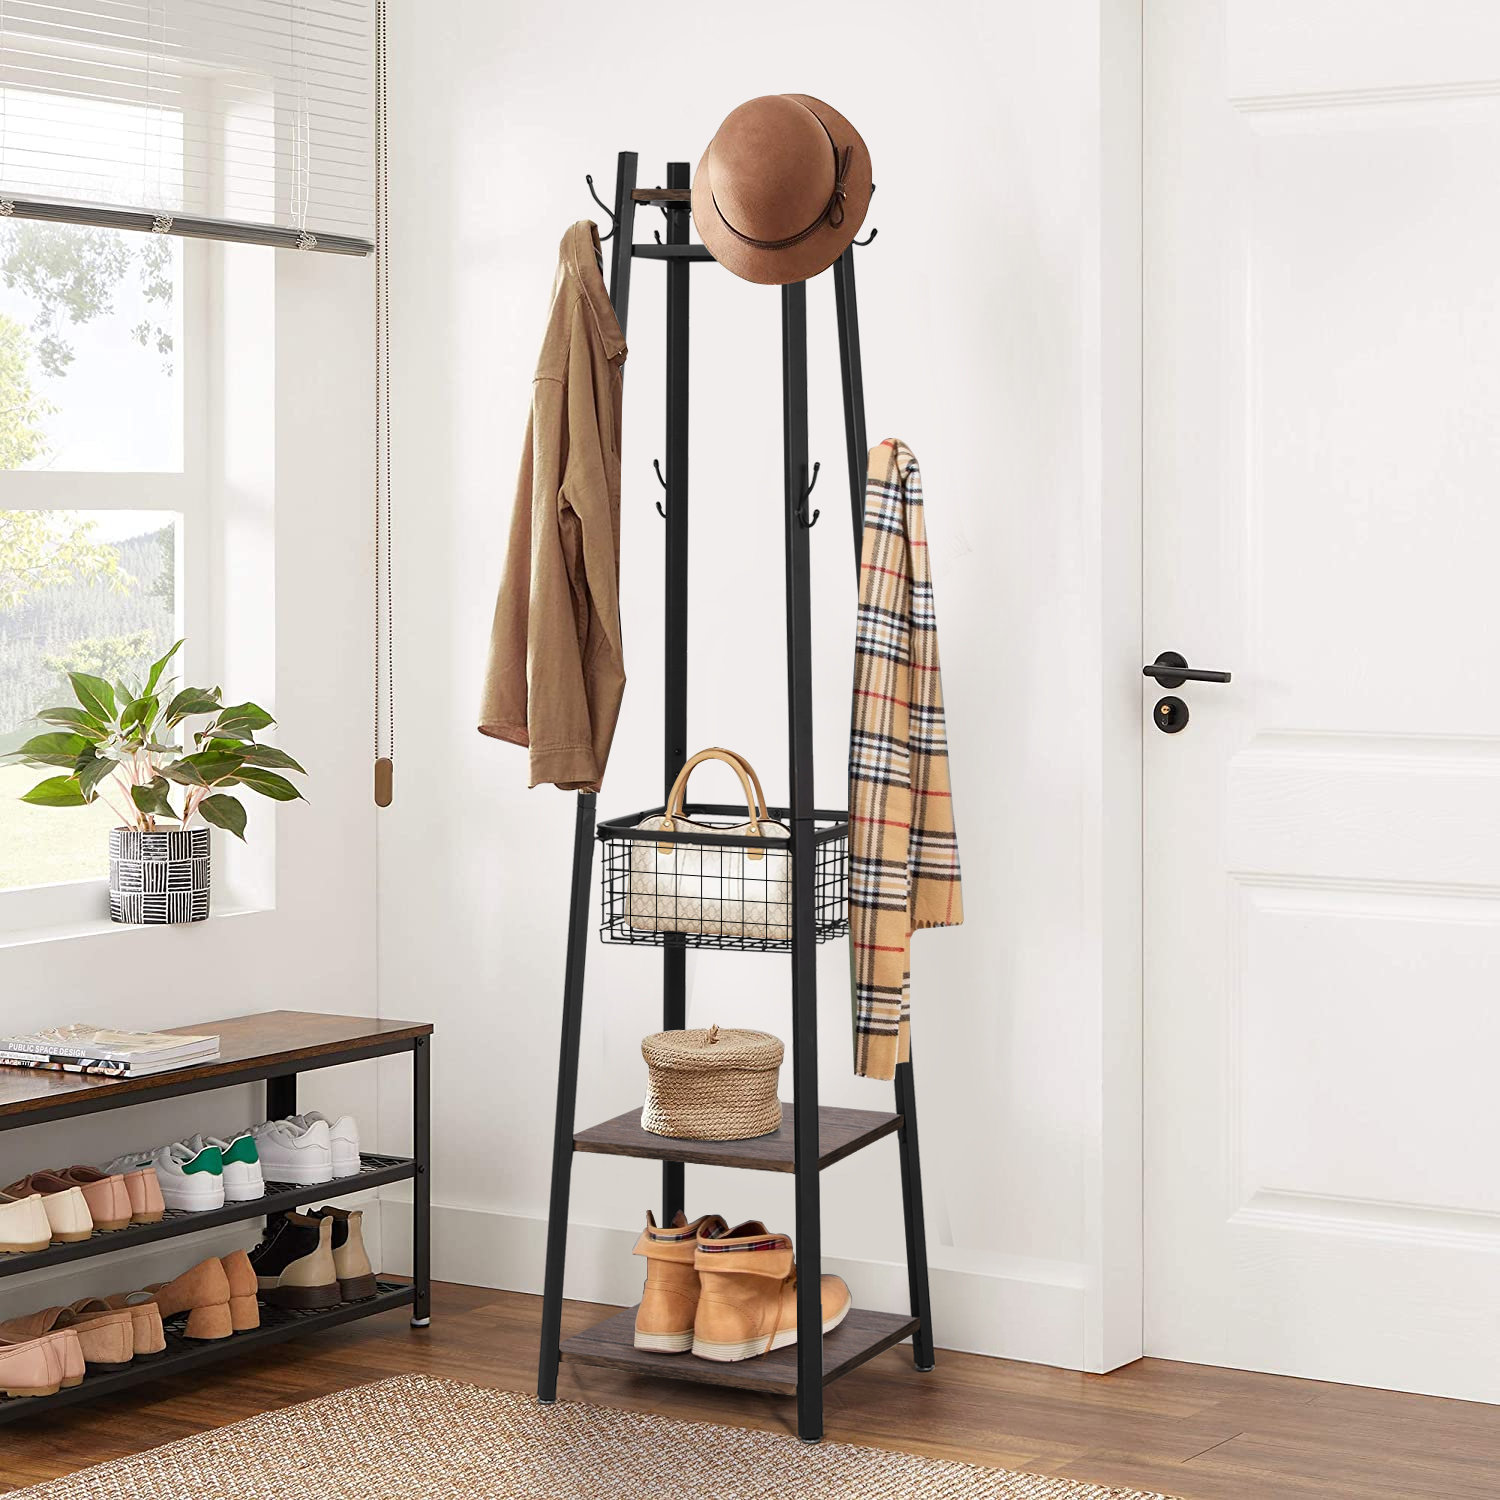 High-Grade Wooden Tree Coat Rack Stand, 6 Hooks - Super Easy Assembly NO  Tools Required - 3 Adjustable Sizes Free Standing Coat Rack,  Hallway/Entryway